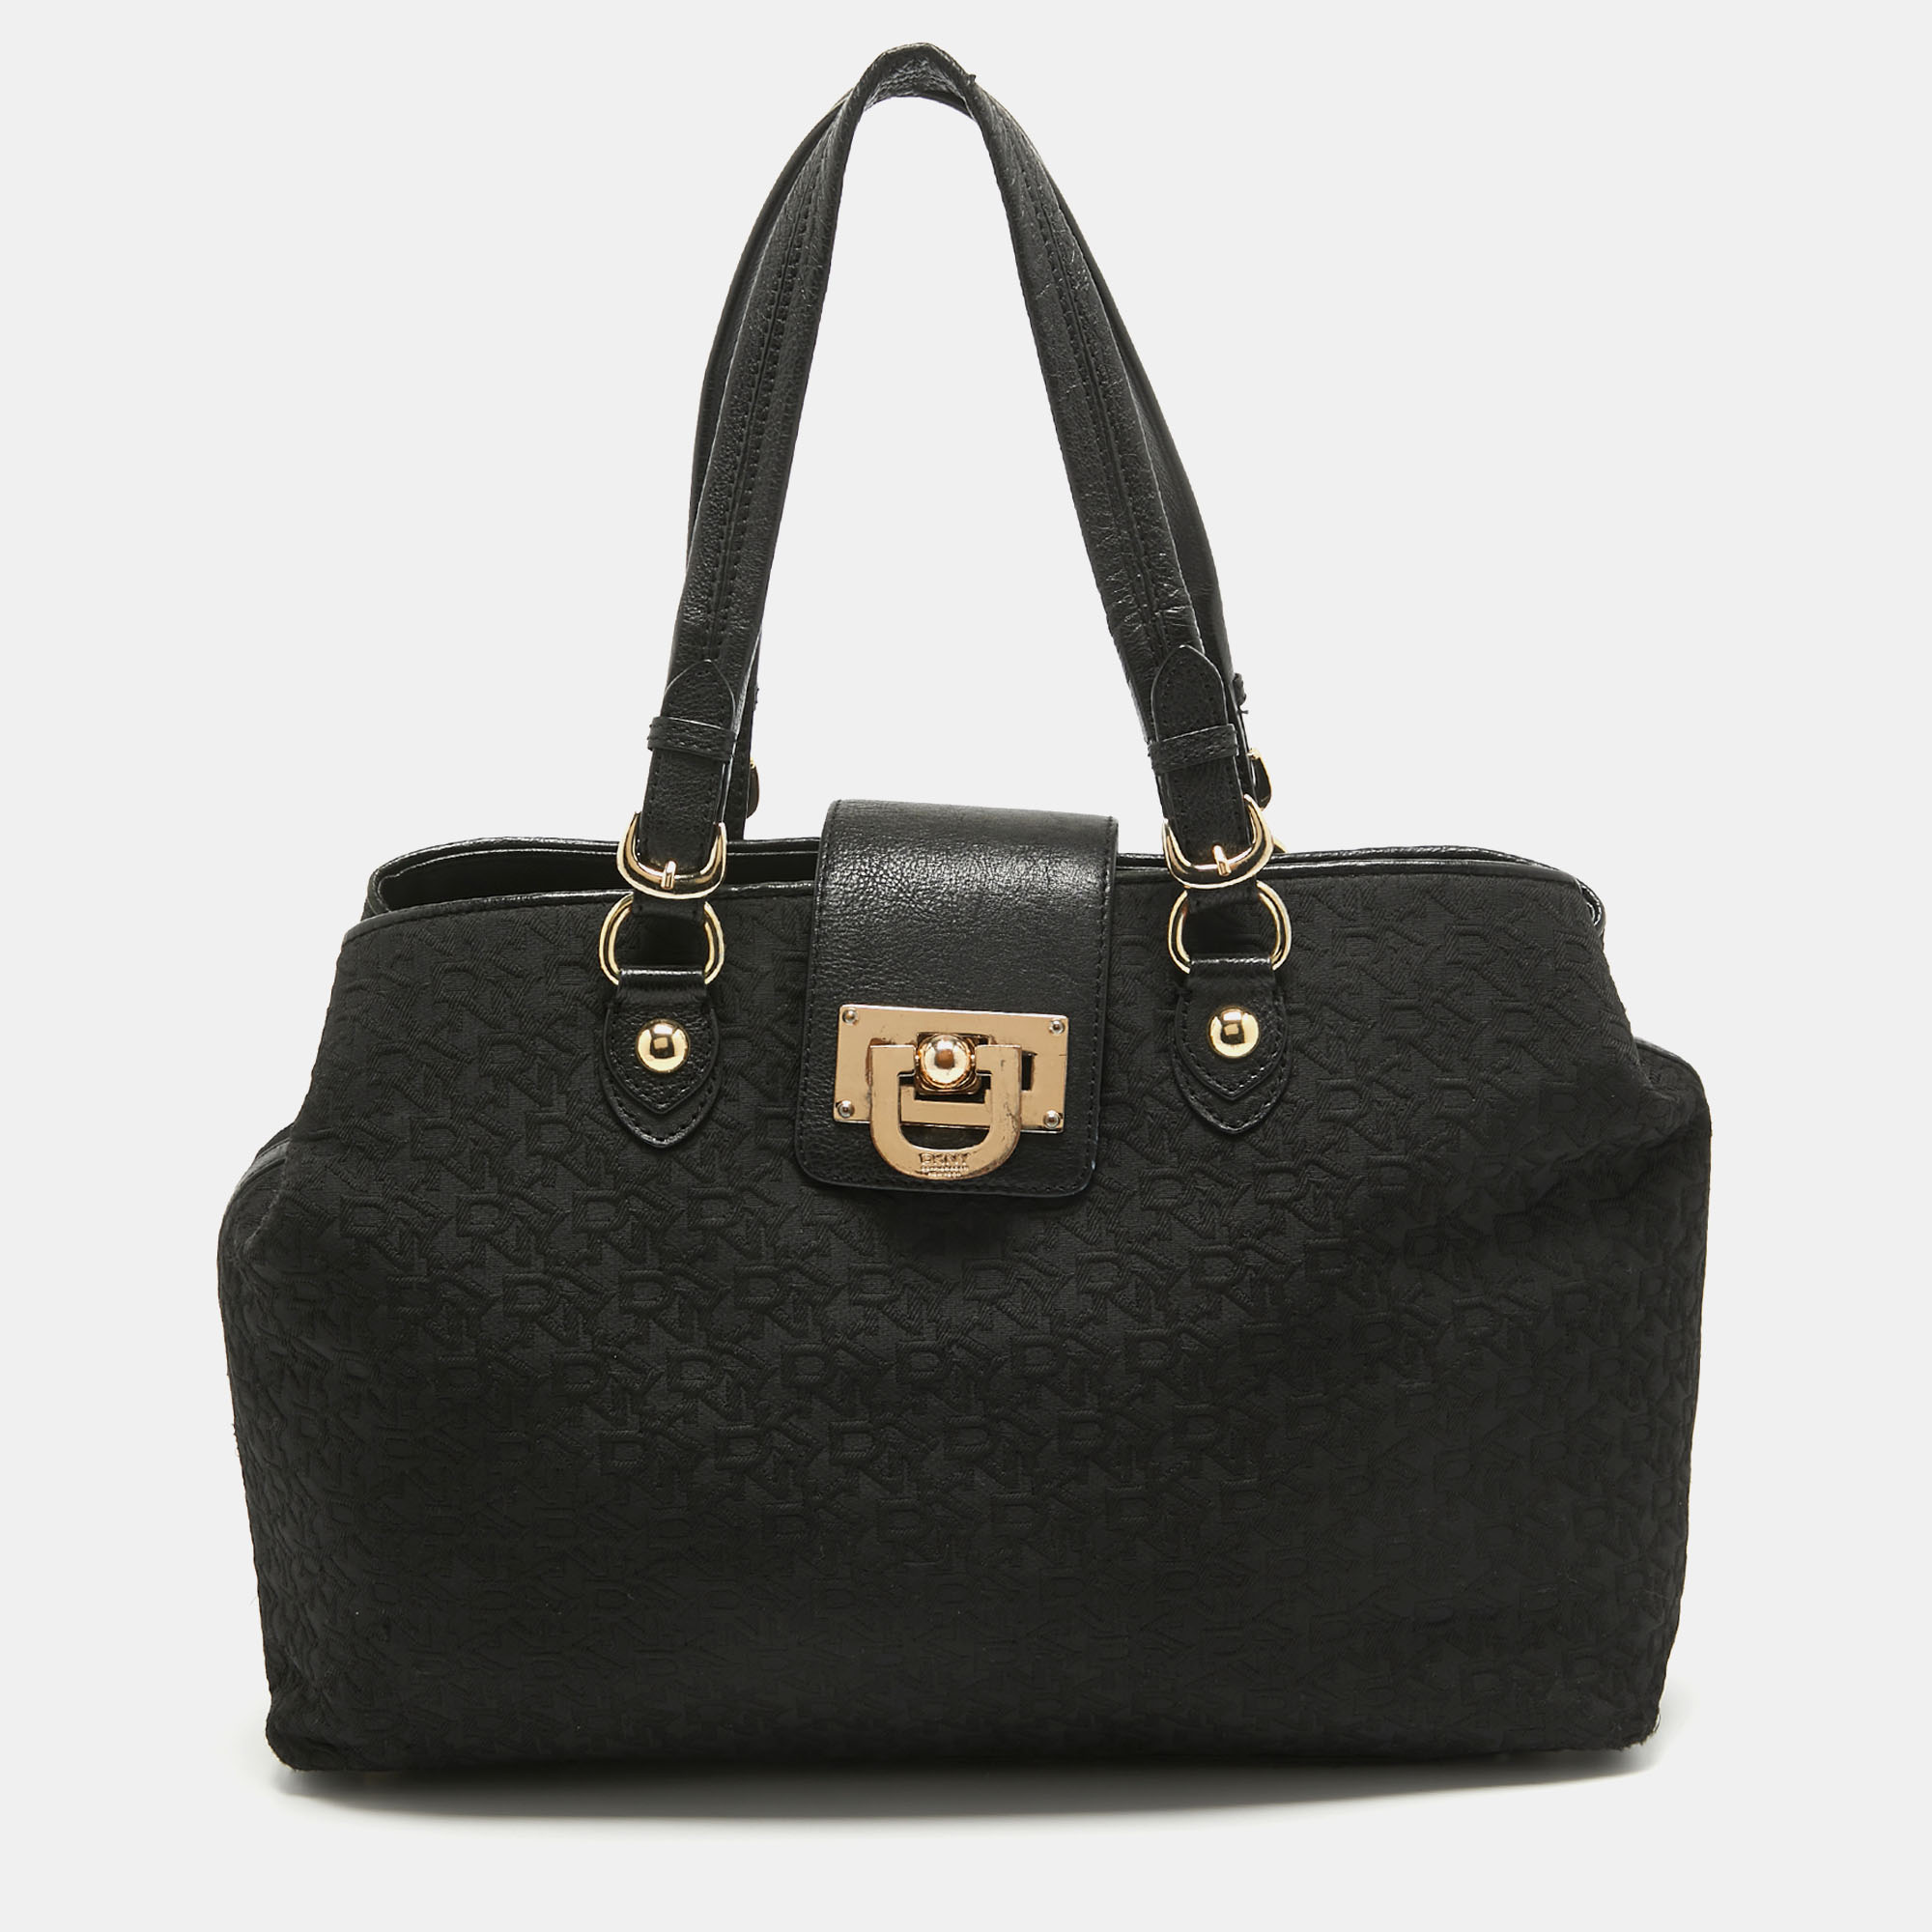 Dkny black monogram canvas and leather flap tote